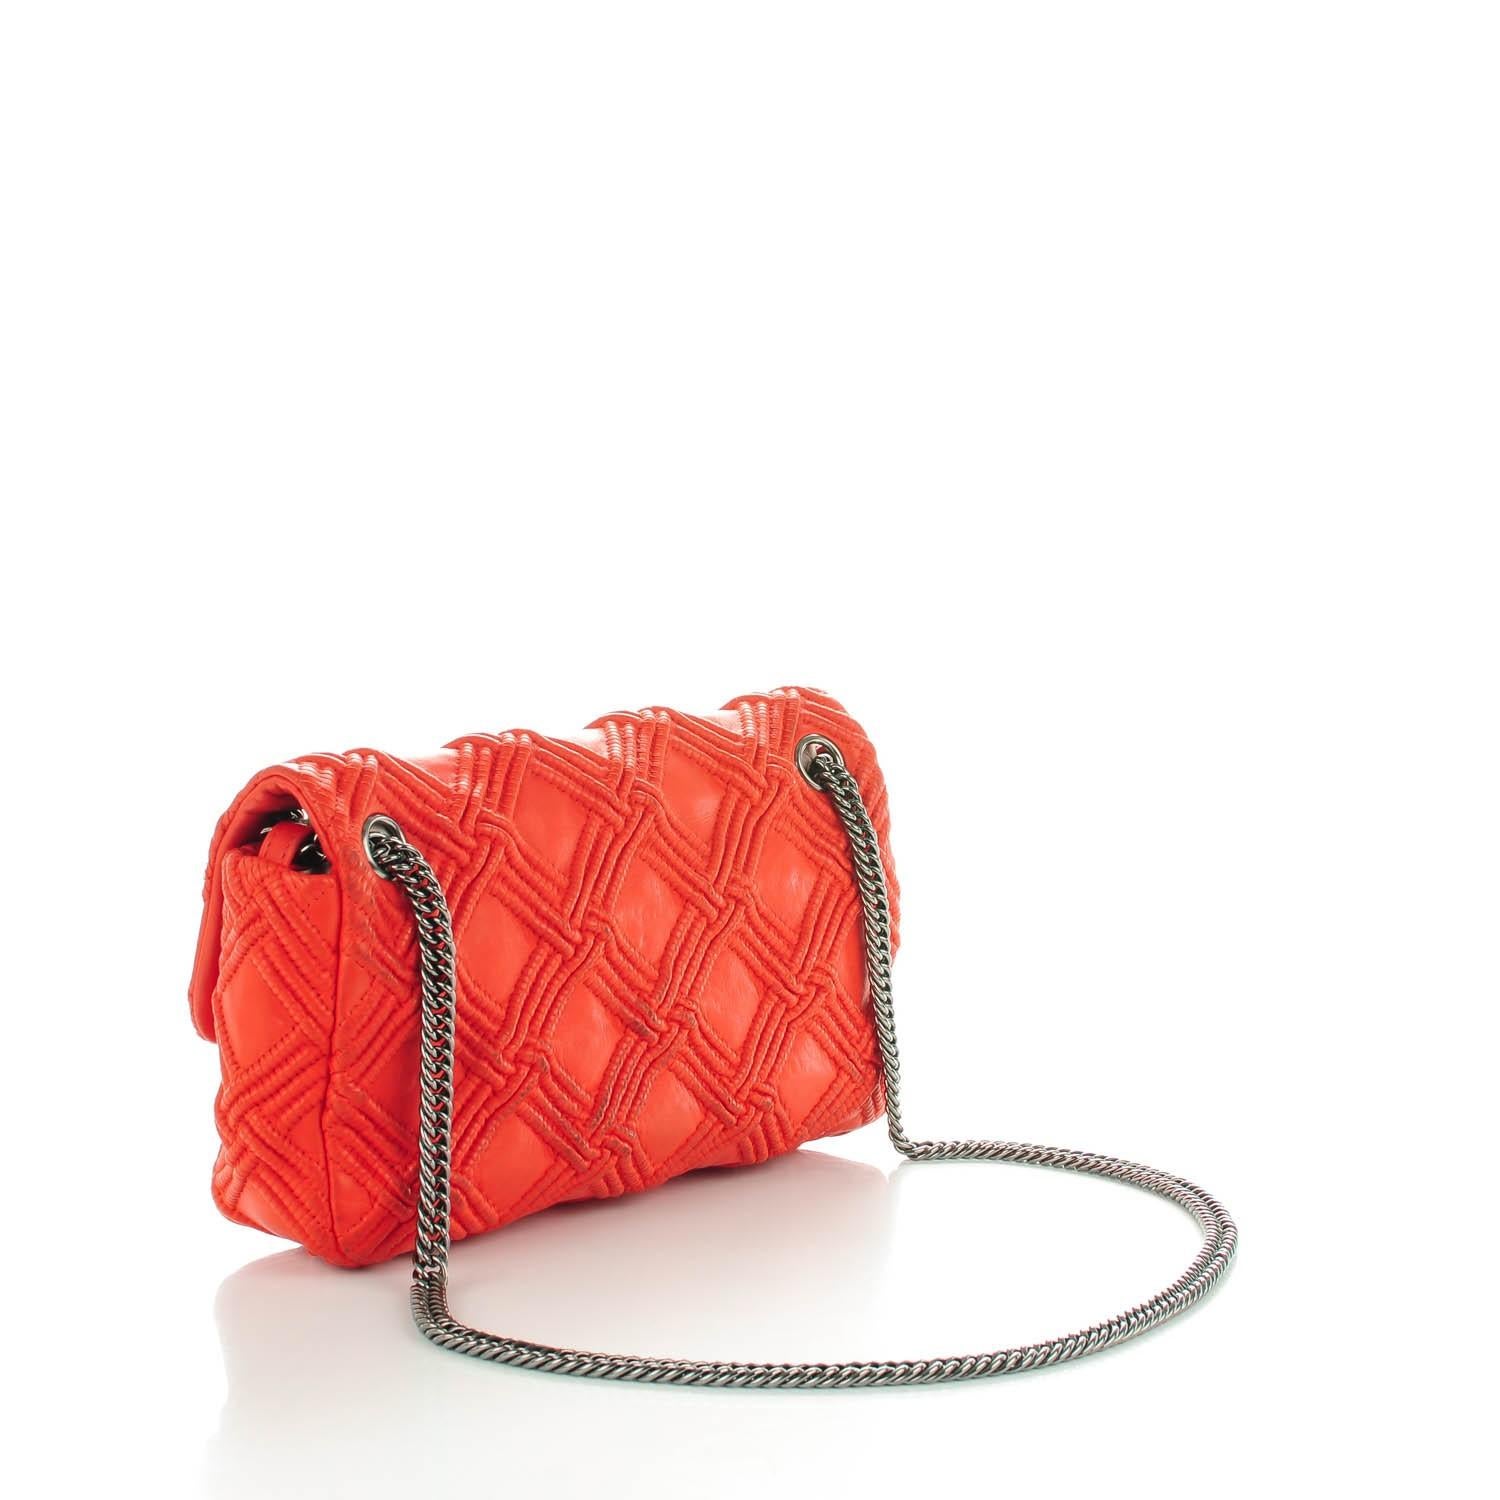 Chanel 2006 Rare Neon Red Coral Soft Lambskin Stitched Medium Classic Flap Bag For Sale 2